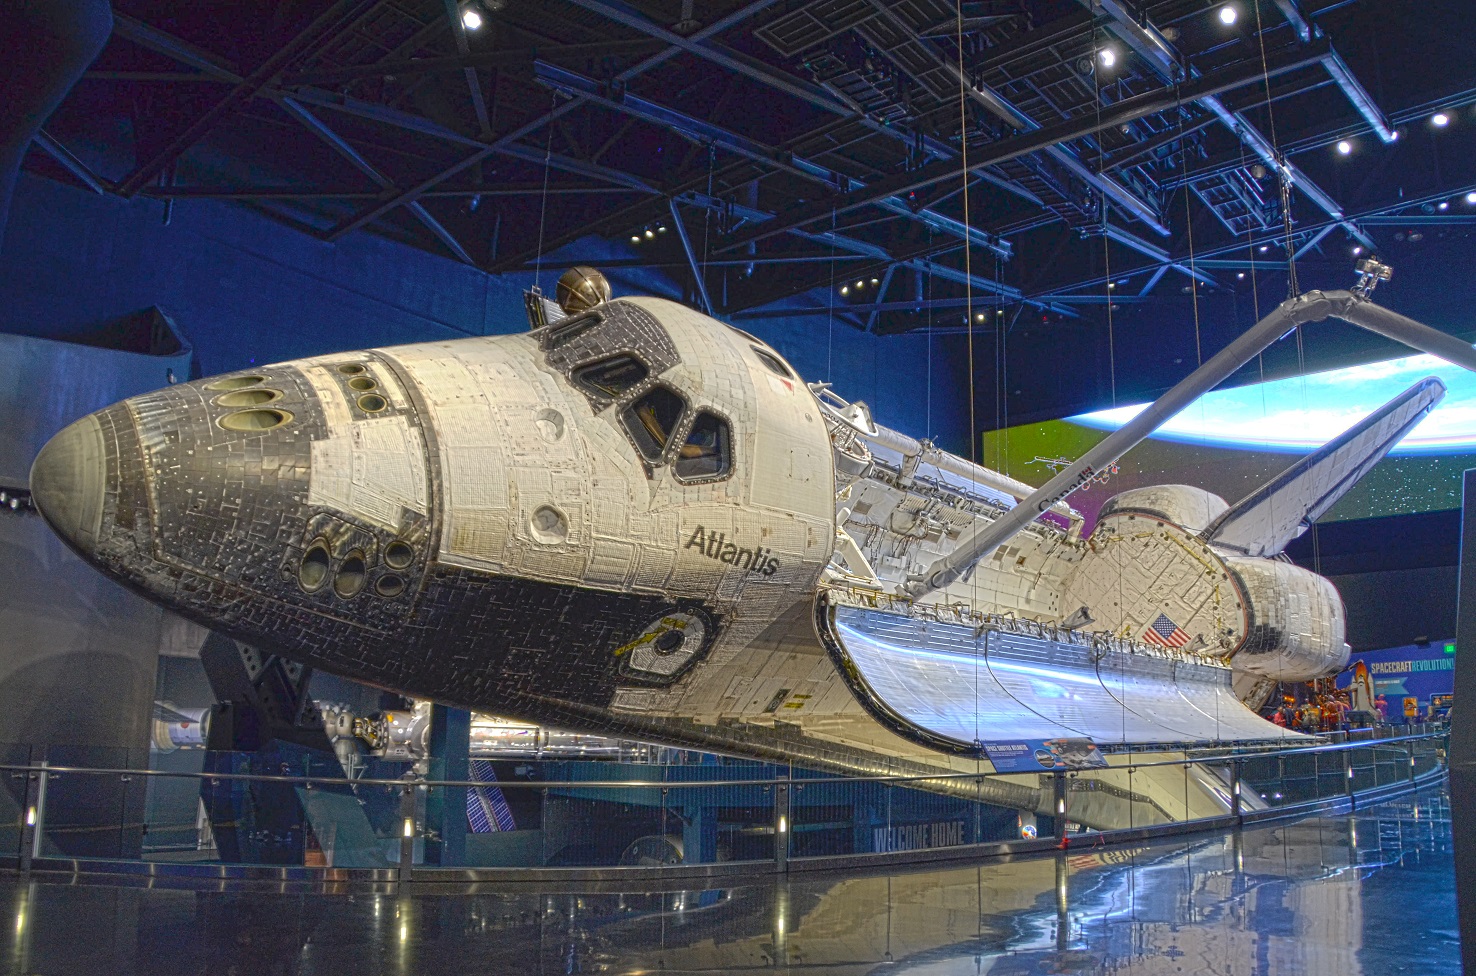 an old fashioned space shuttle on display in a museum